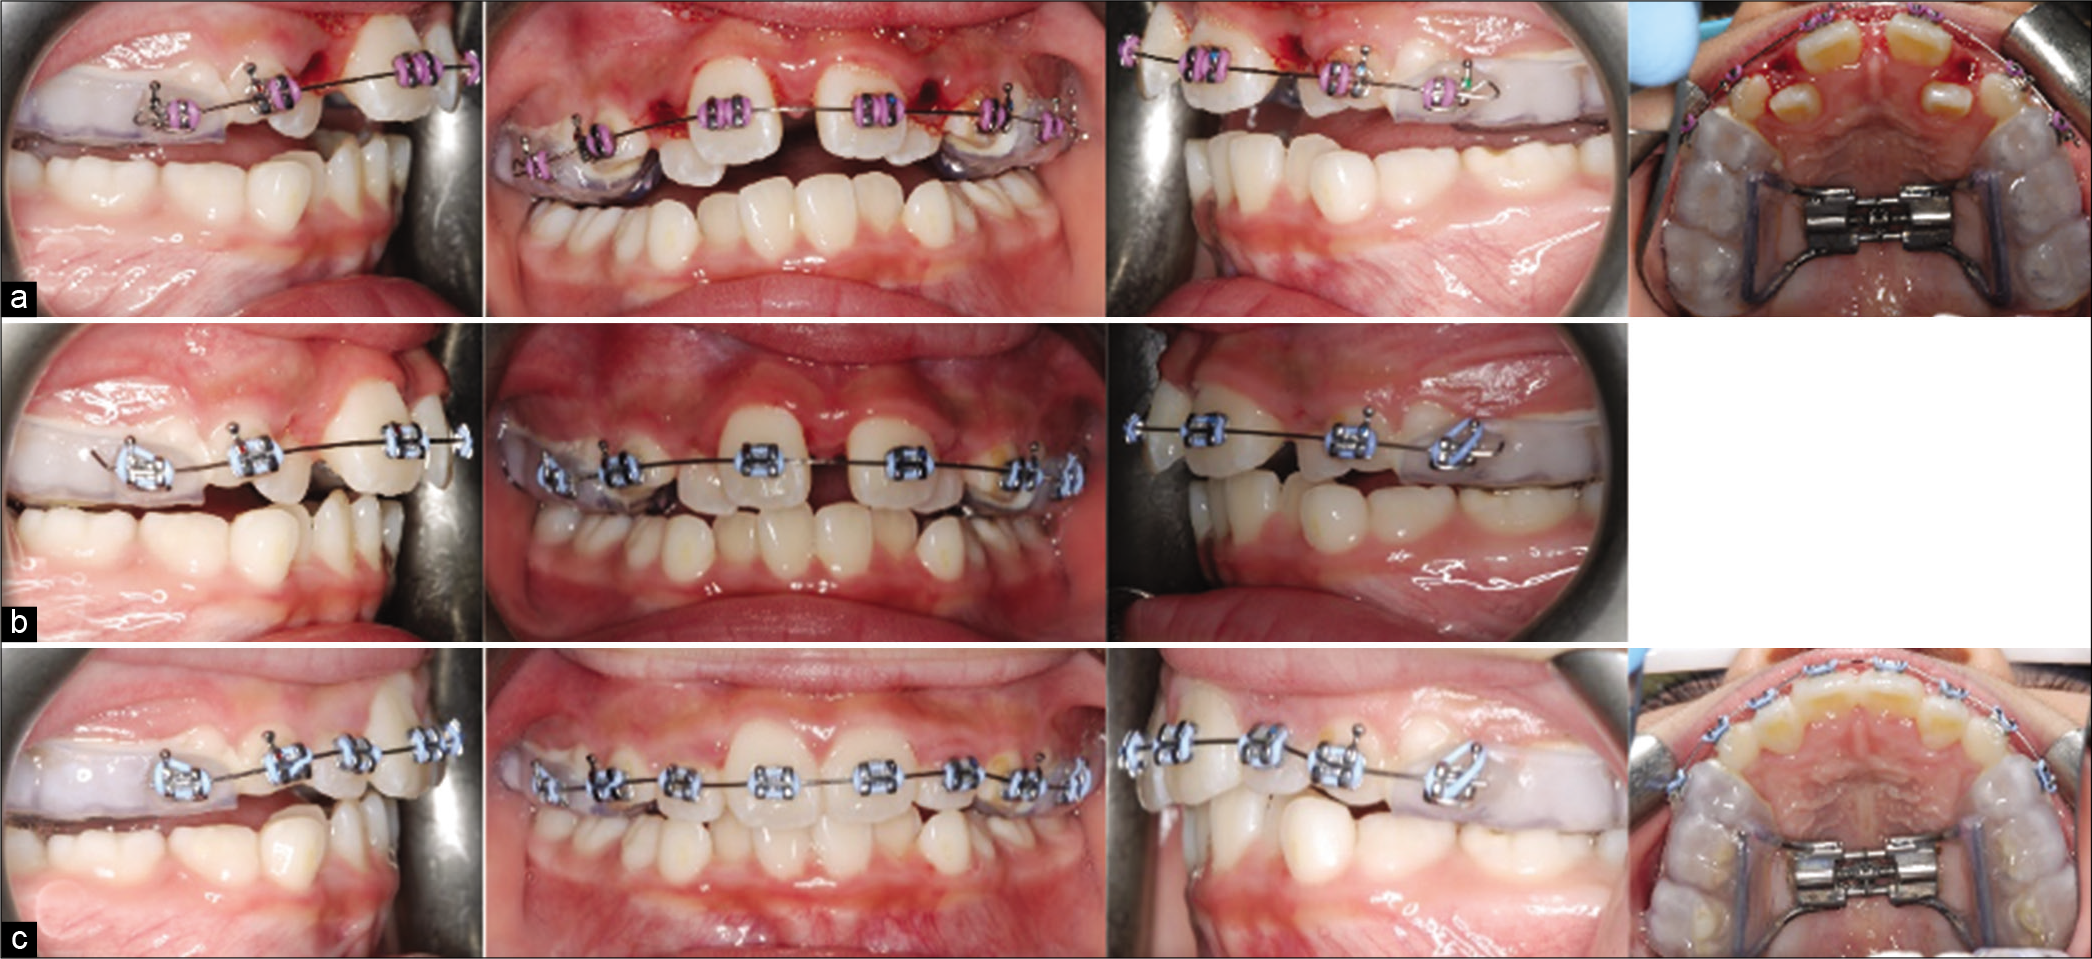 Case 2 (a) progress treatment photographs after maxillary expansion. Notice the bite-opening immediately after expansion. (b) Settling of the posterior occlusion after 2 months. (c) progress treatment photographs showing alignment of the maxillary incisors.